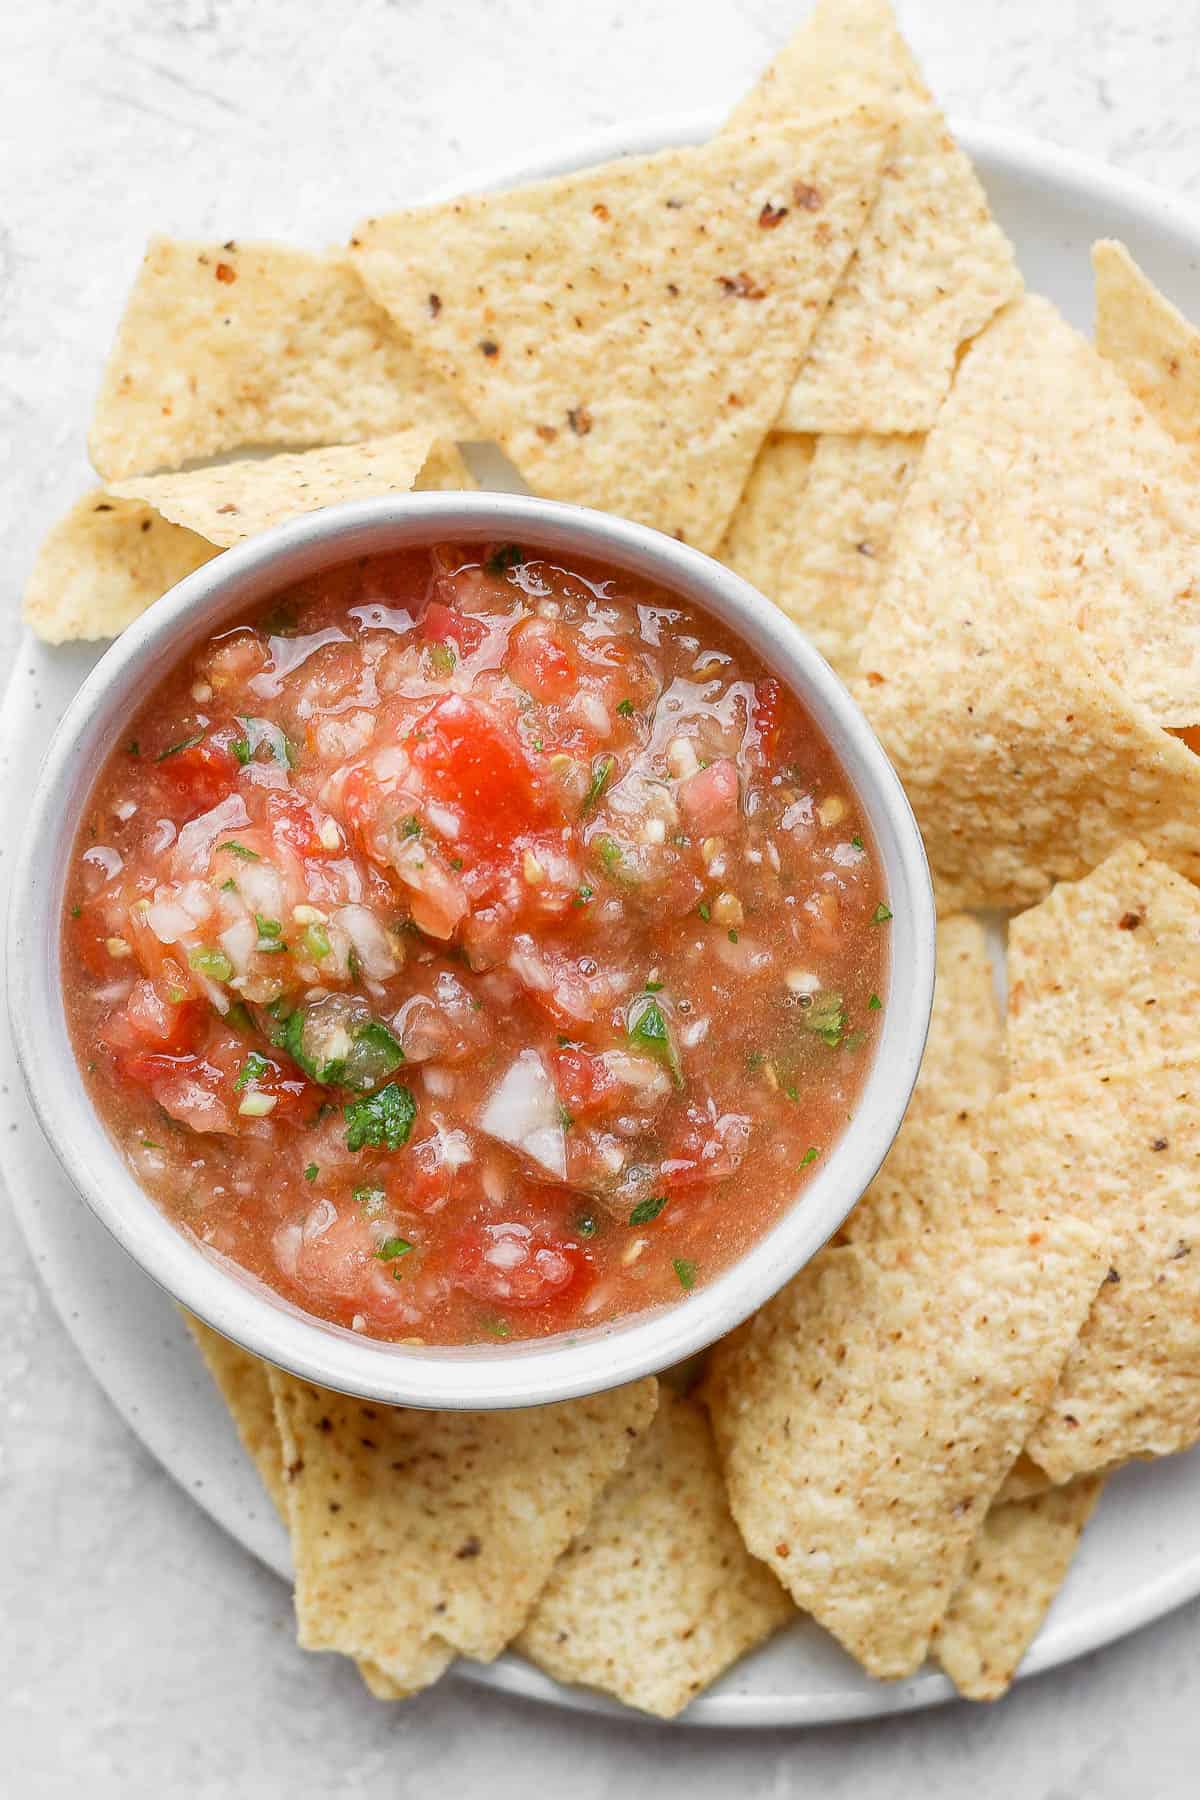 How To Make Salsa Easy Blender Recipe Feelgoodfoodie